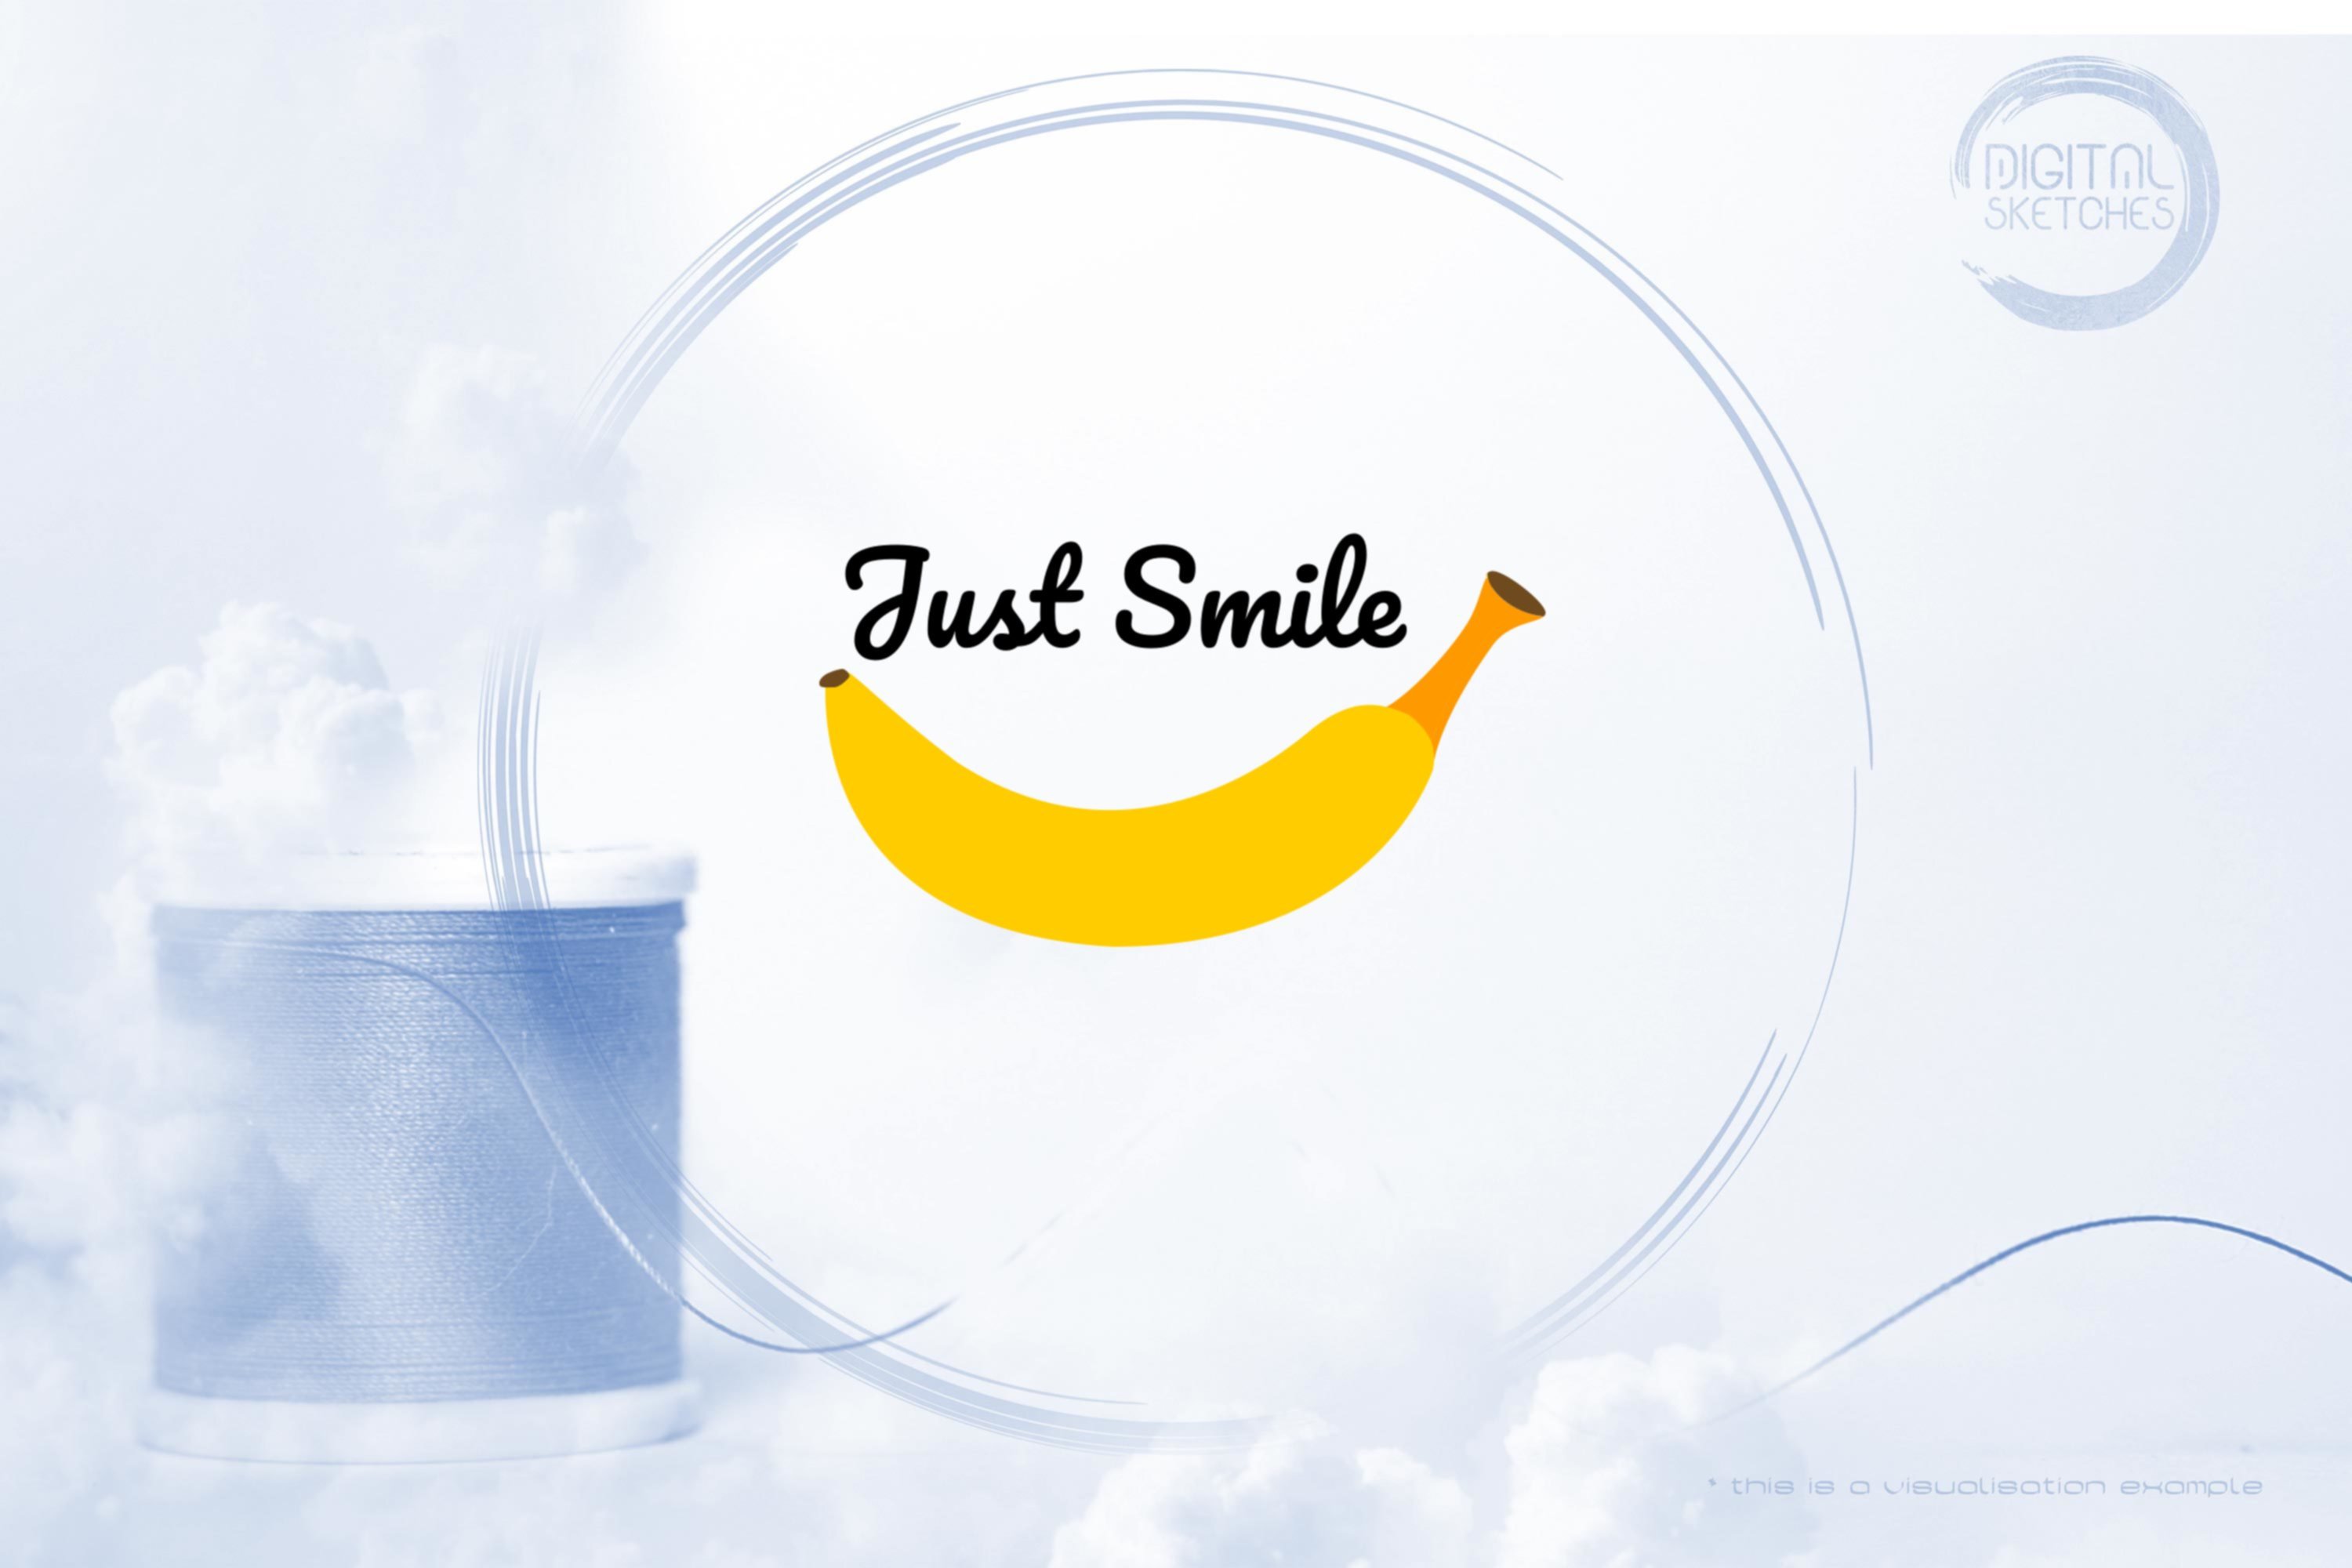 Just Smile